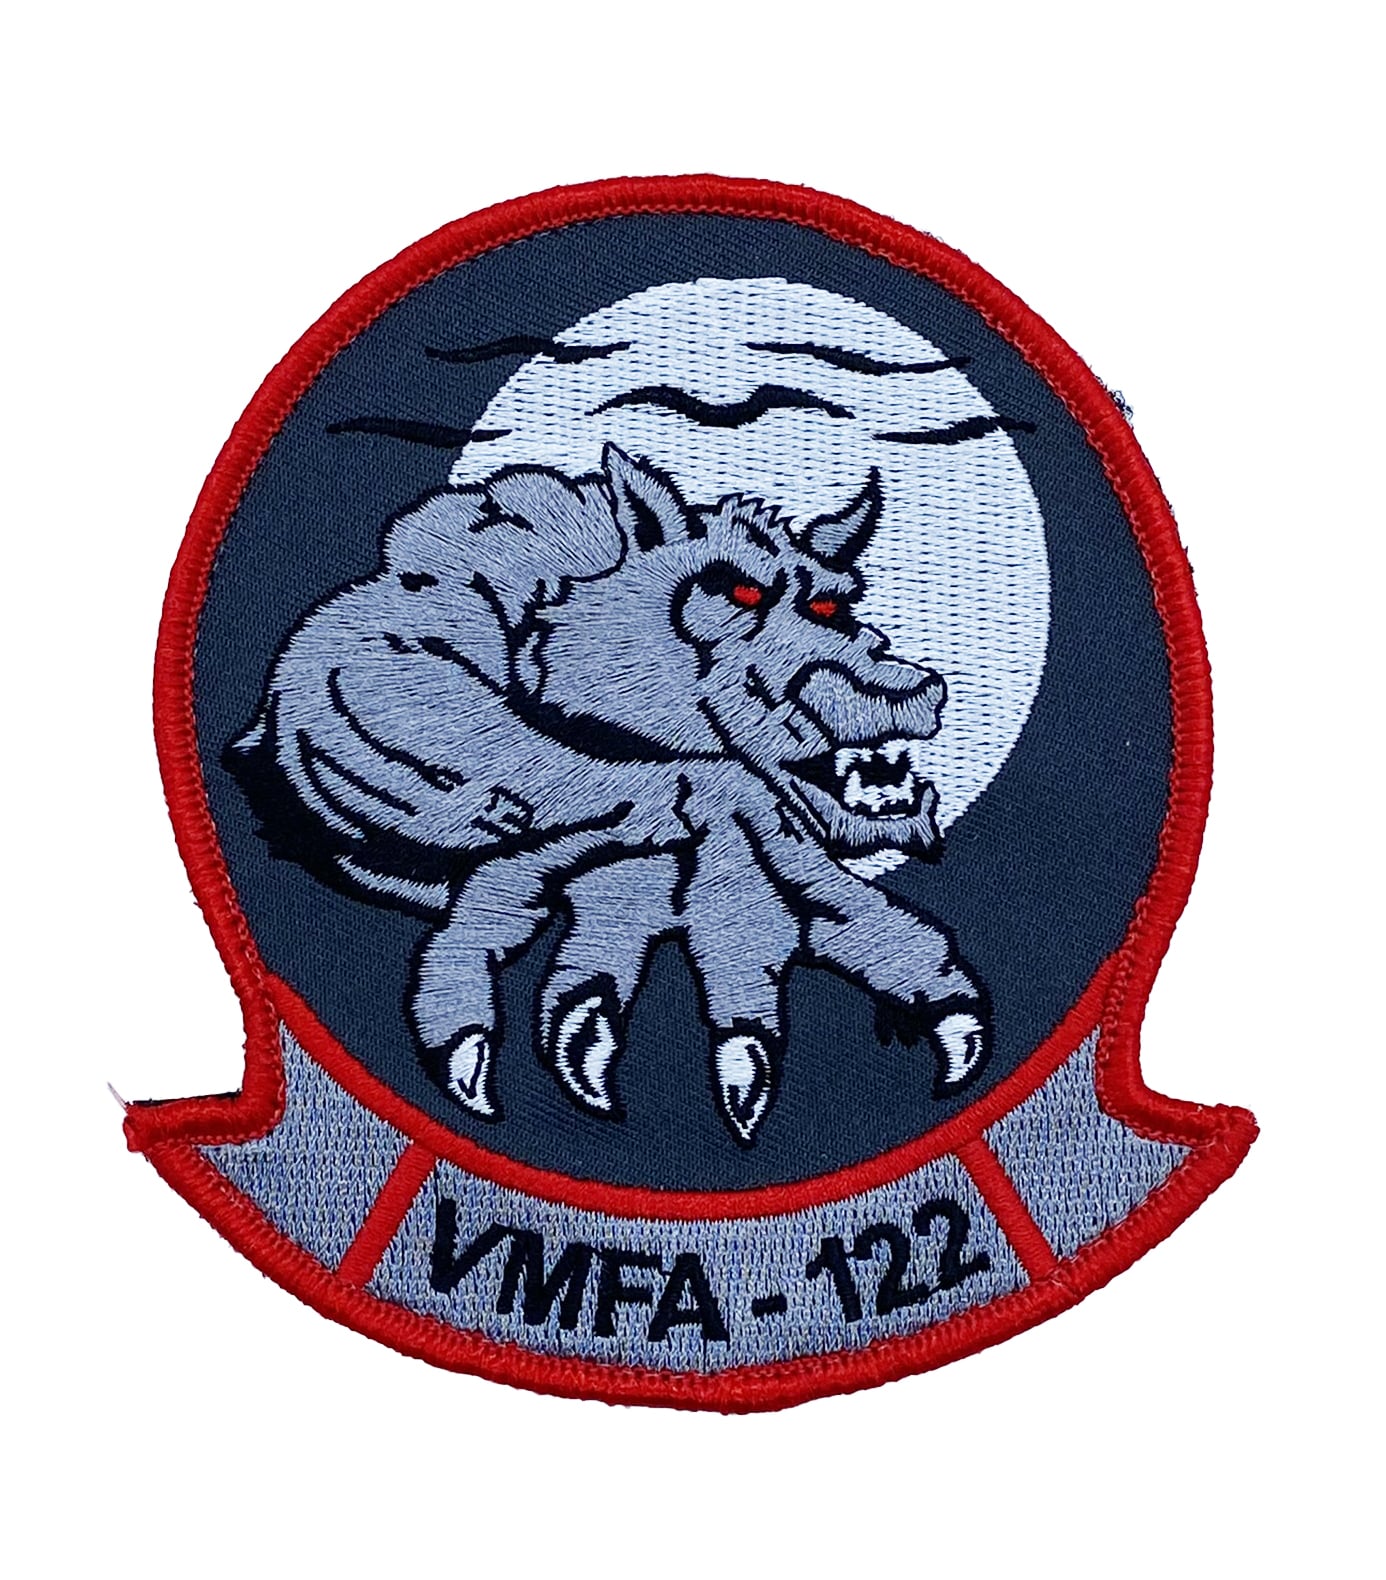 VMFA-122 Werewolves Patch – With Hook and Loop